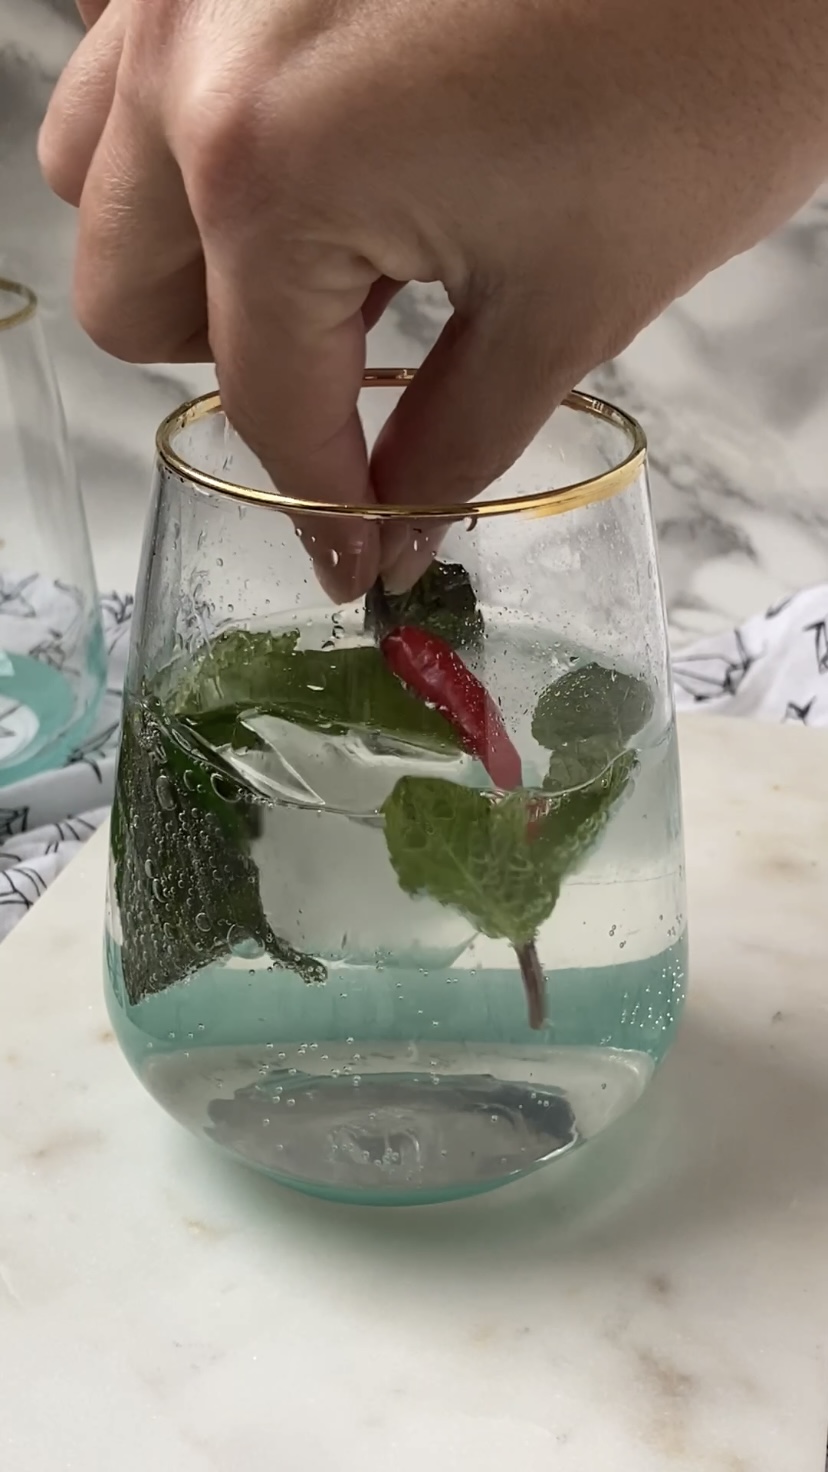 Adding a red Thai chili to a cocktail glass.